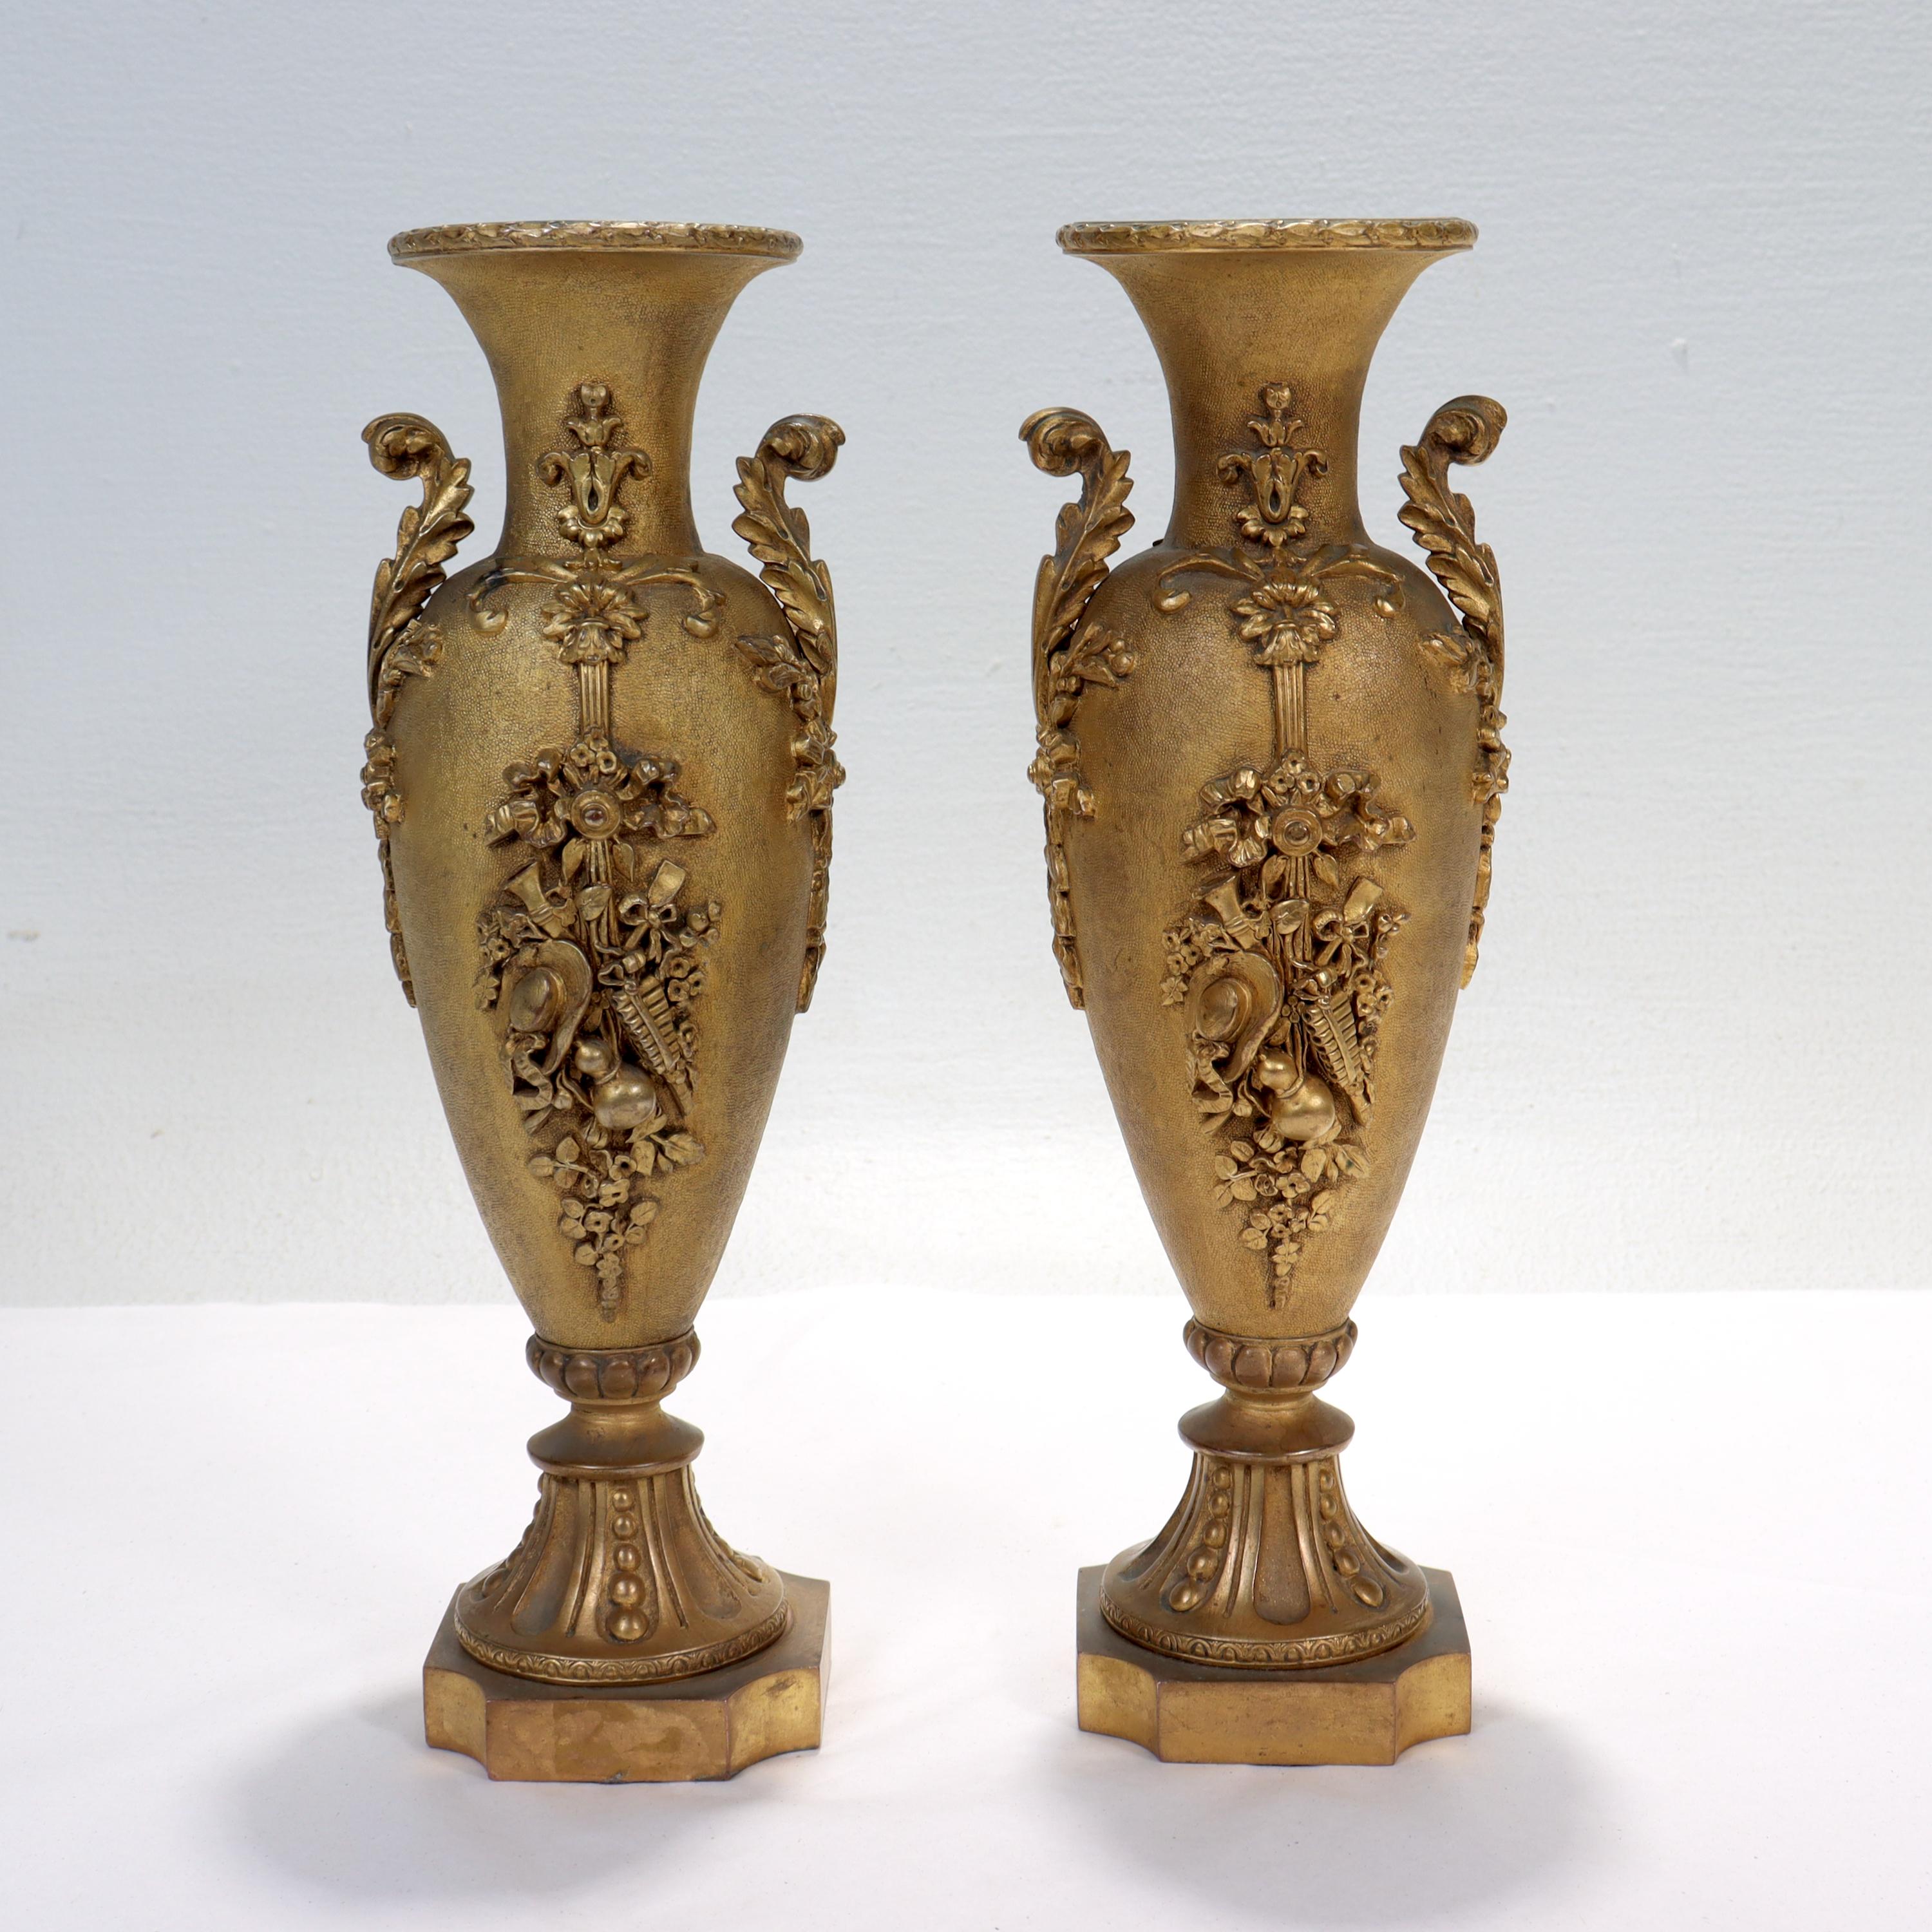 Antique Second Empire French Doré Gilt Bronze Vases or Urns In Good Condition For Sale In Philadelphia, PA